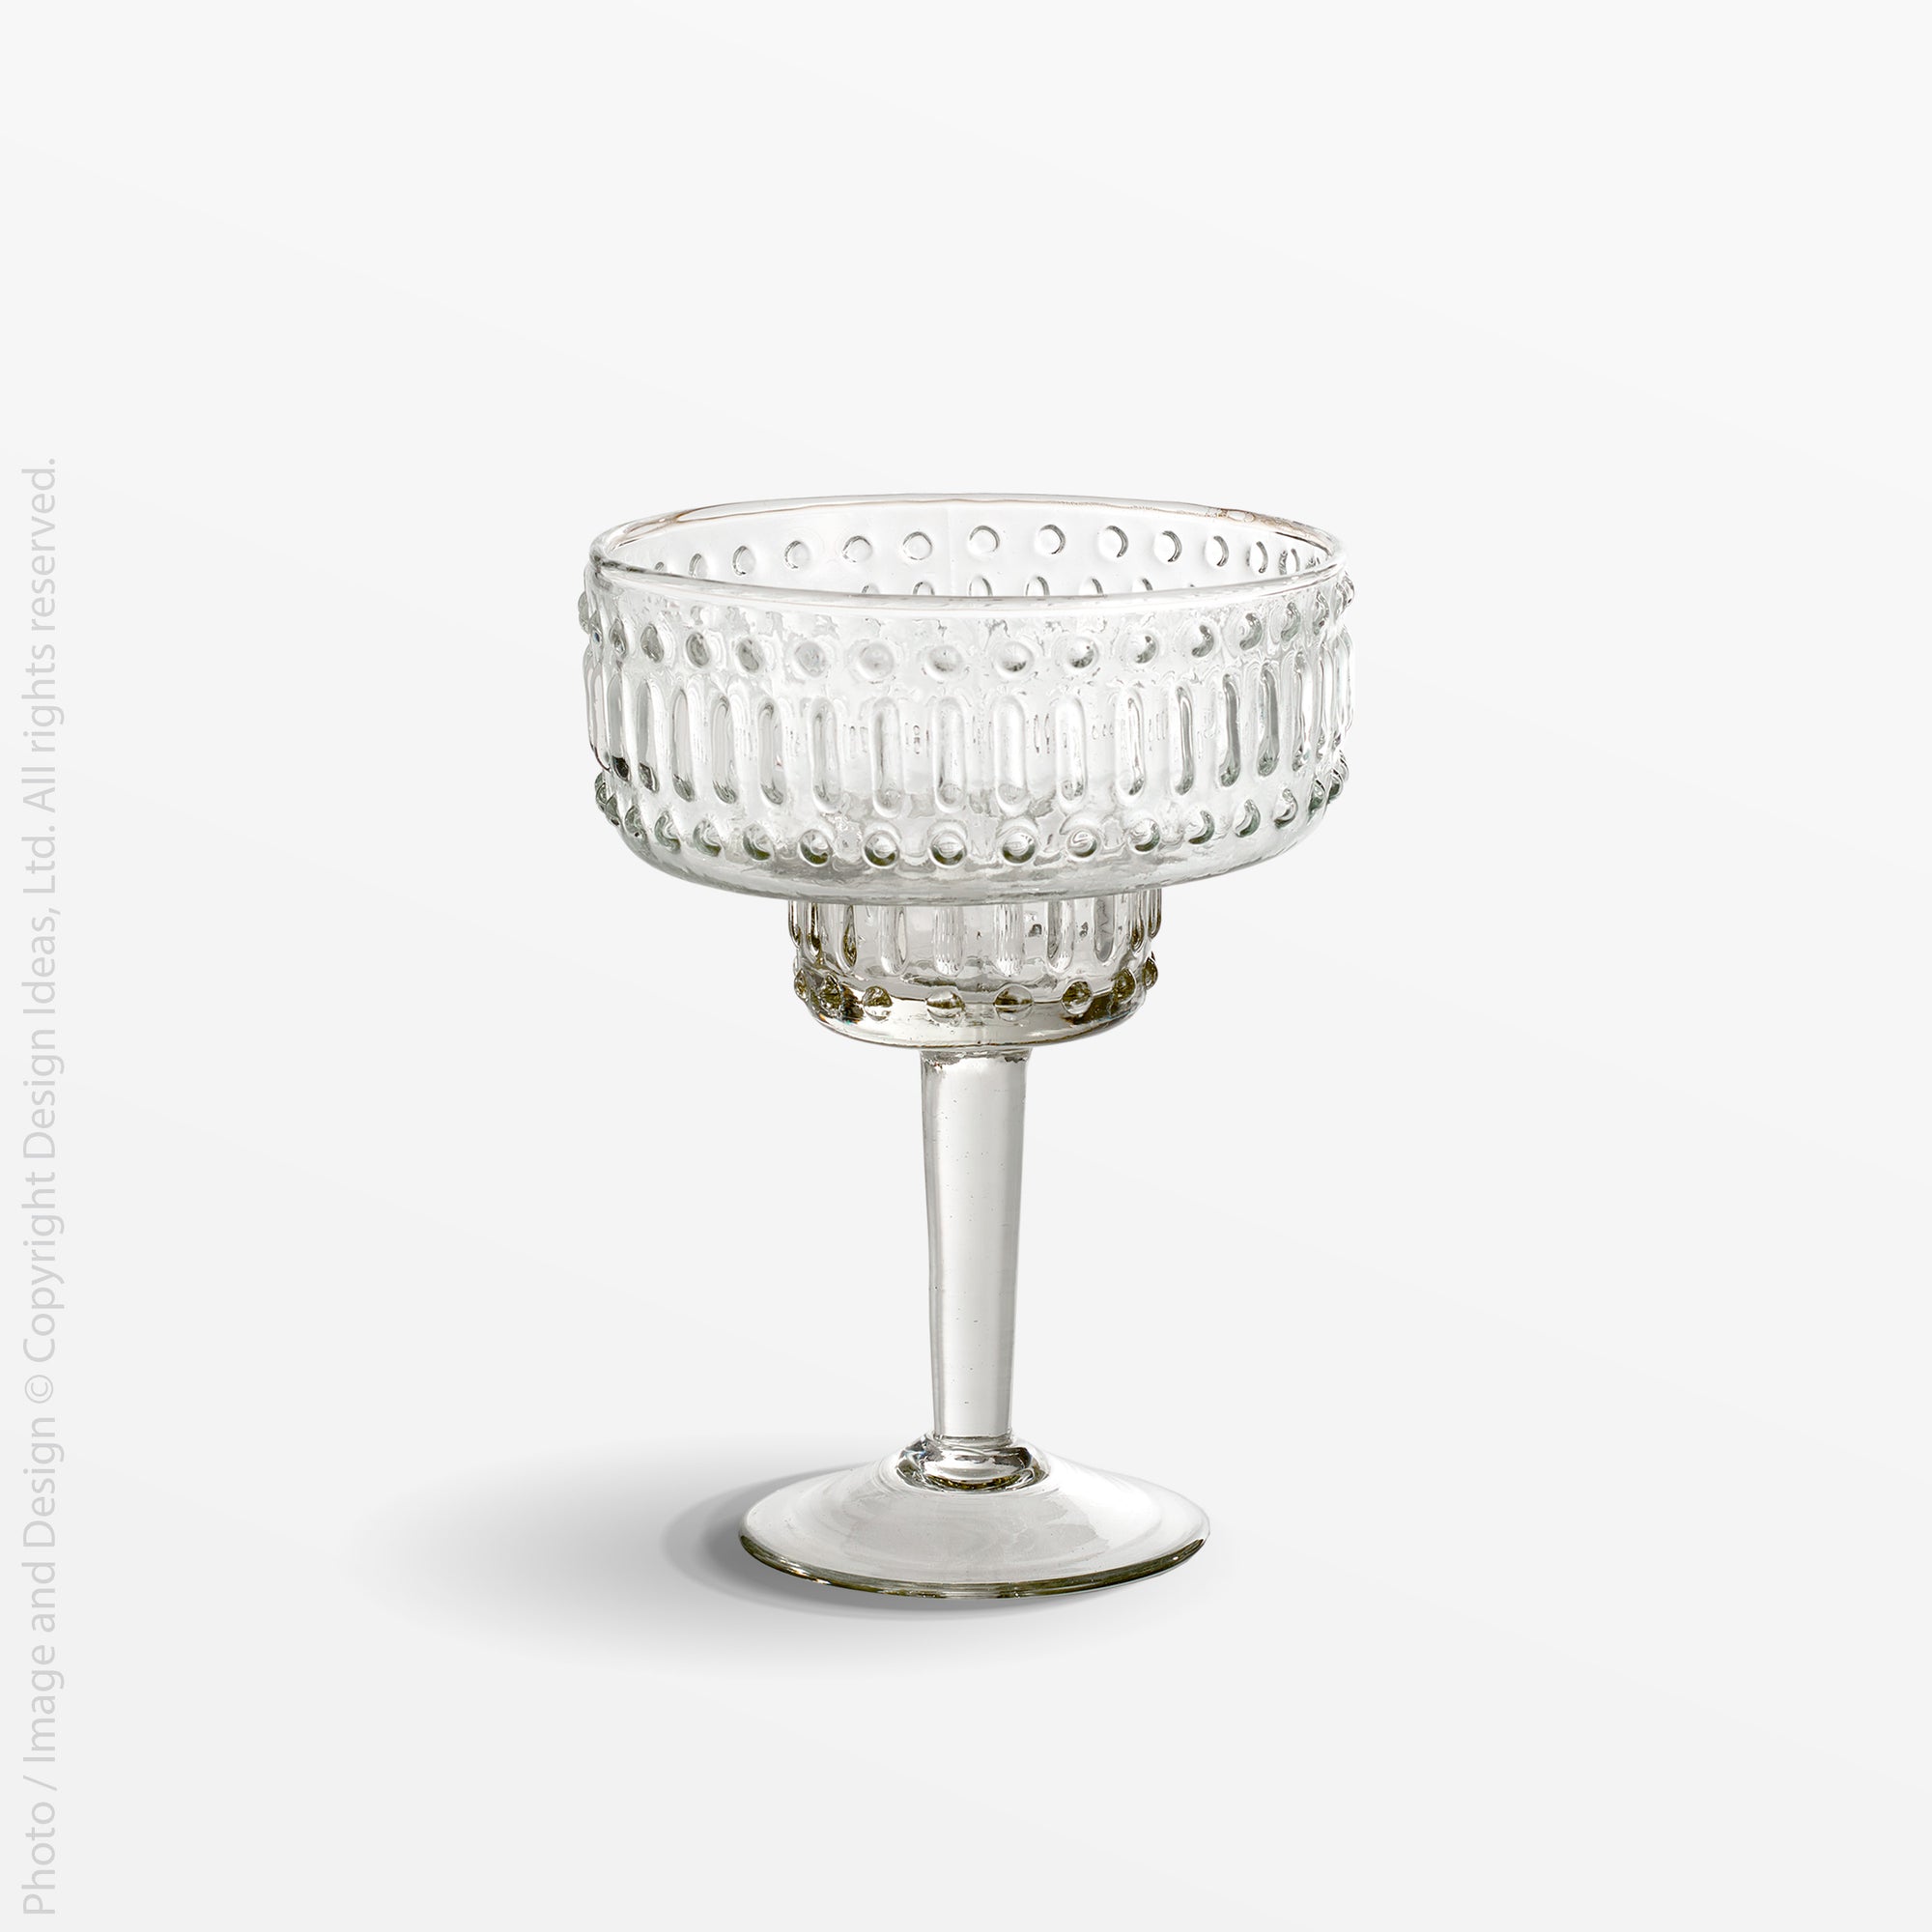 Morse™ recycled mouth blown margarita glass